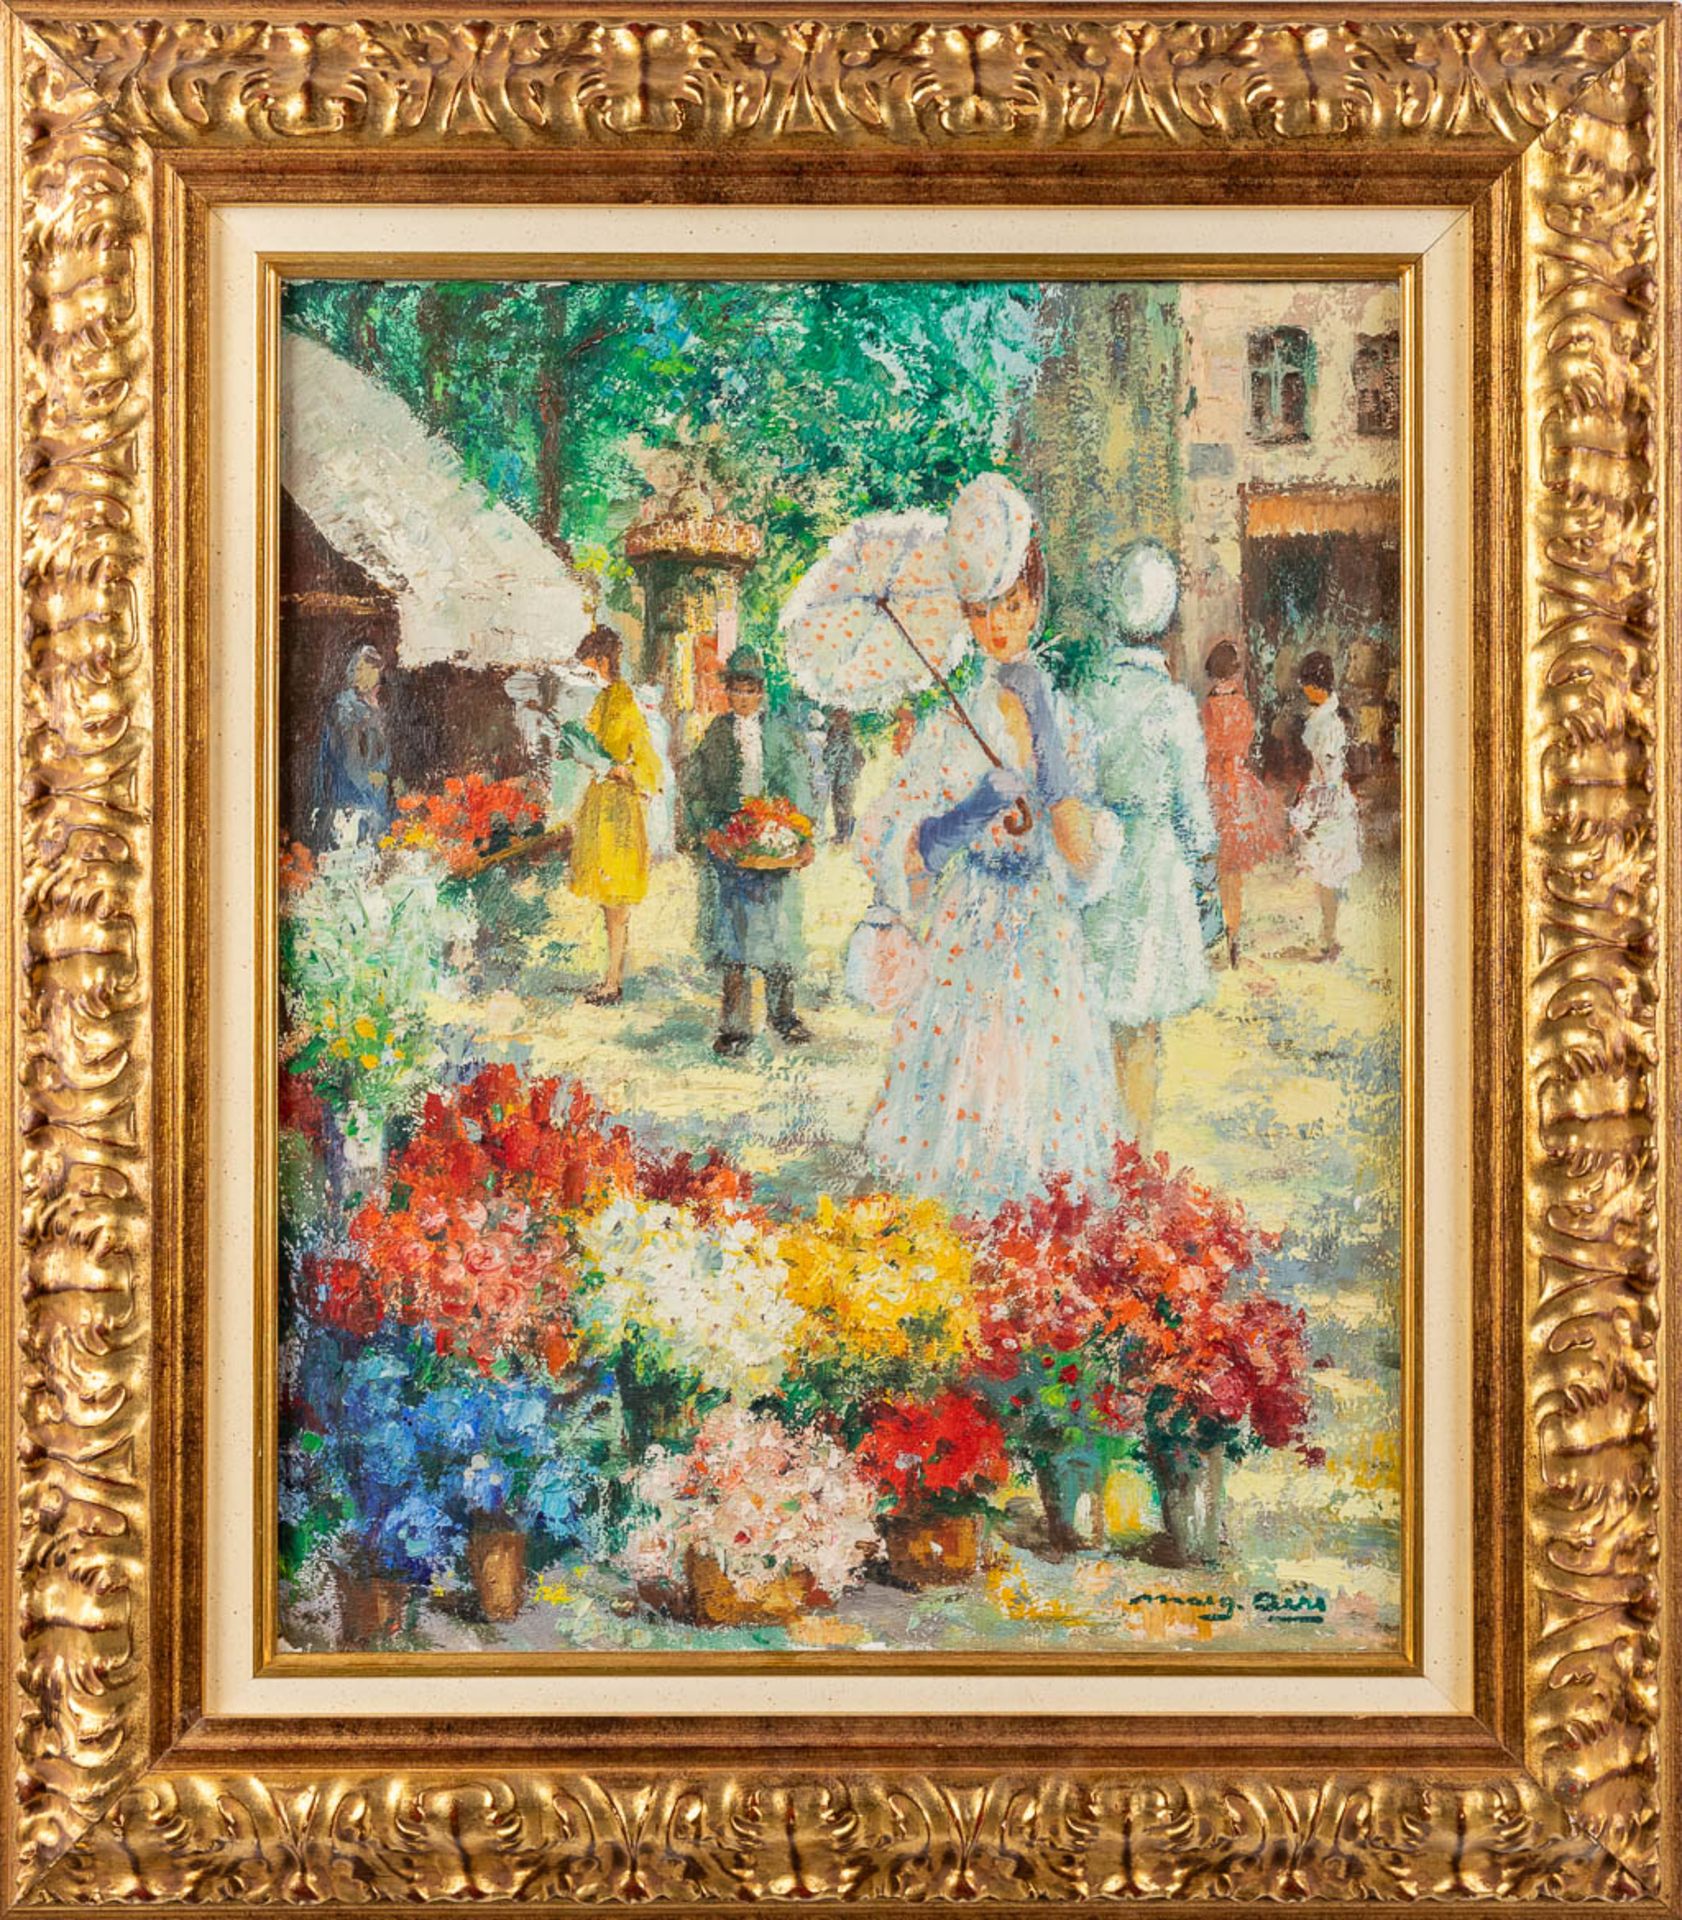 Marguerite AERS (1918-1995) 'The Flower Market' oil on canvas. (W:45 x H:55 cm) - Image 3 of 8